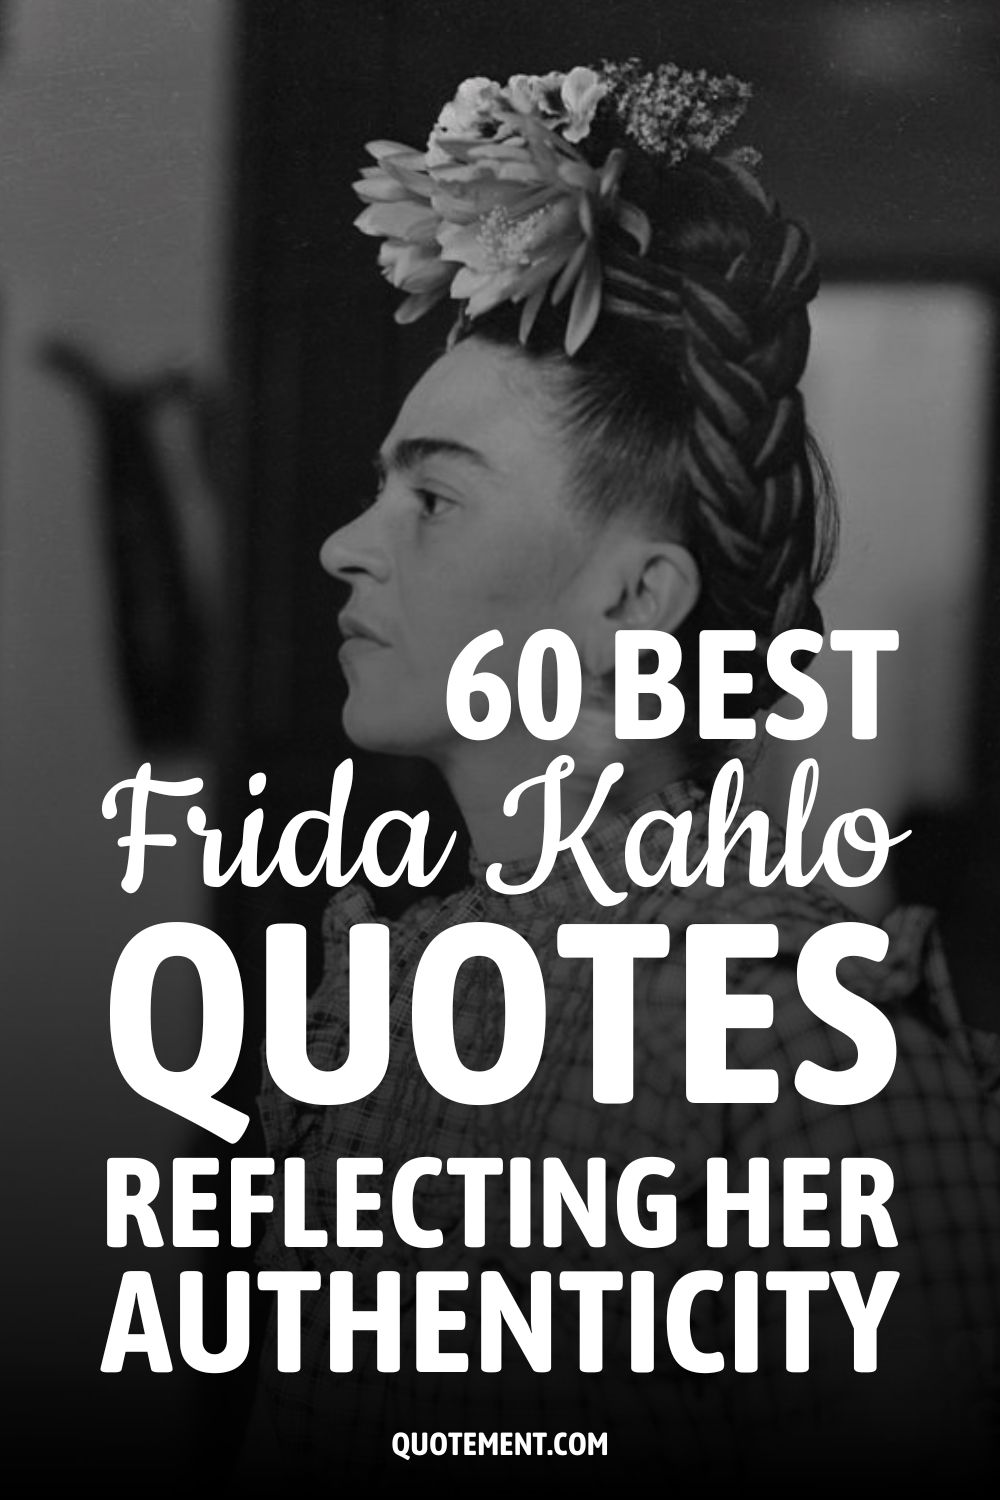 60 Best Frida Kahlo Quotes Reflecting Her Authenticity
